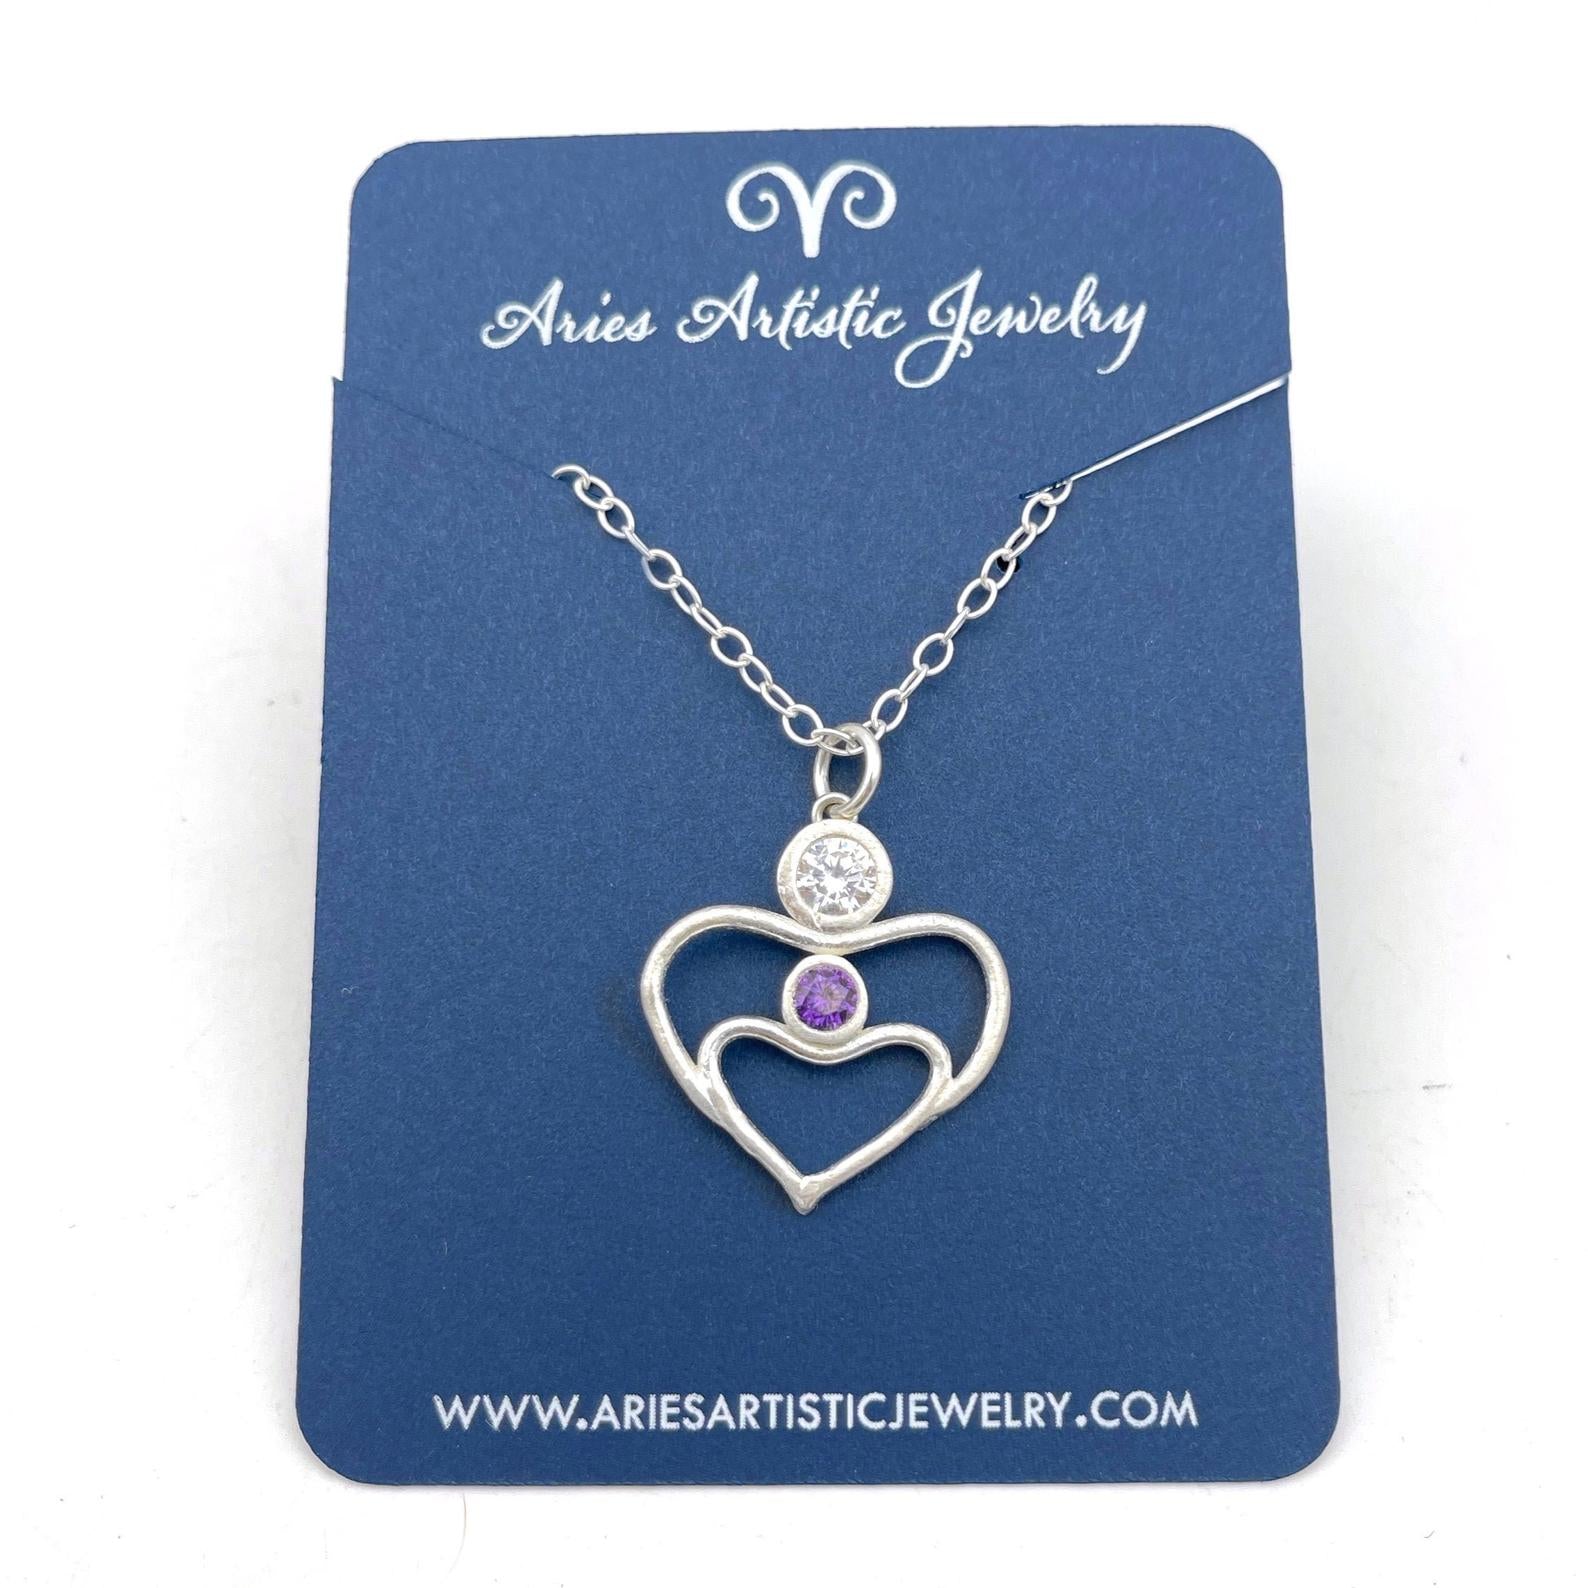 Mother & Child Heart Necklace Love Jewelry with CZ Amethyst and Diamond